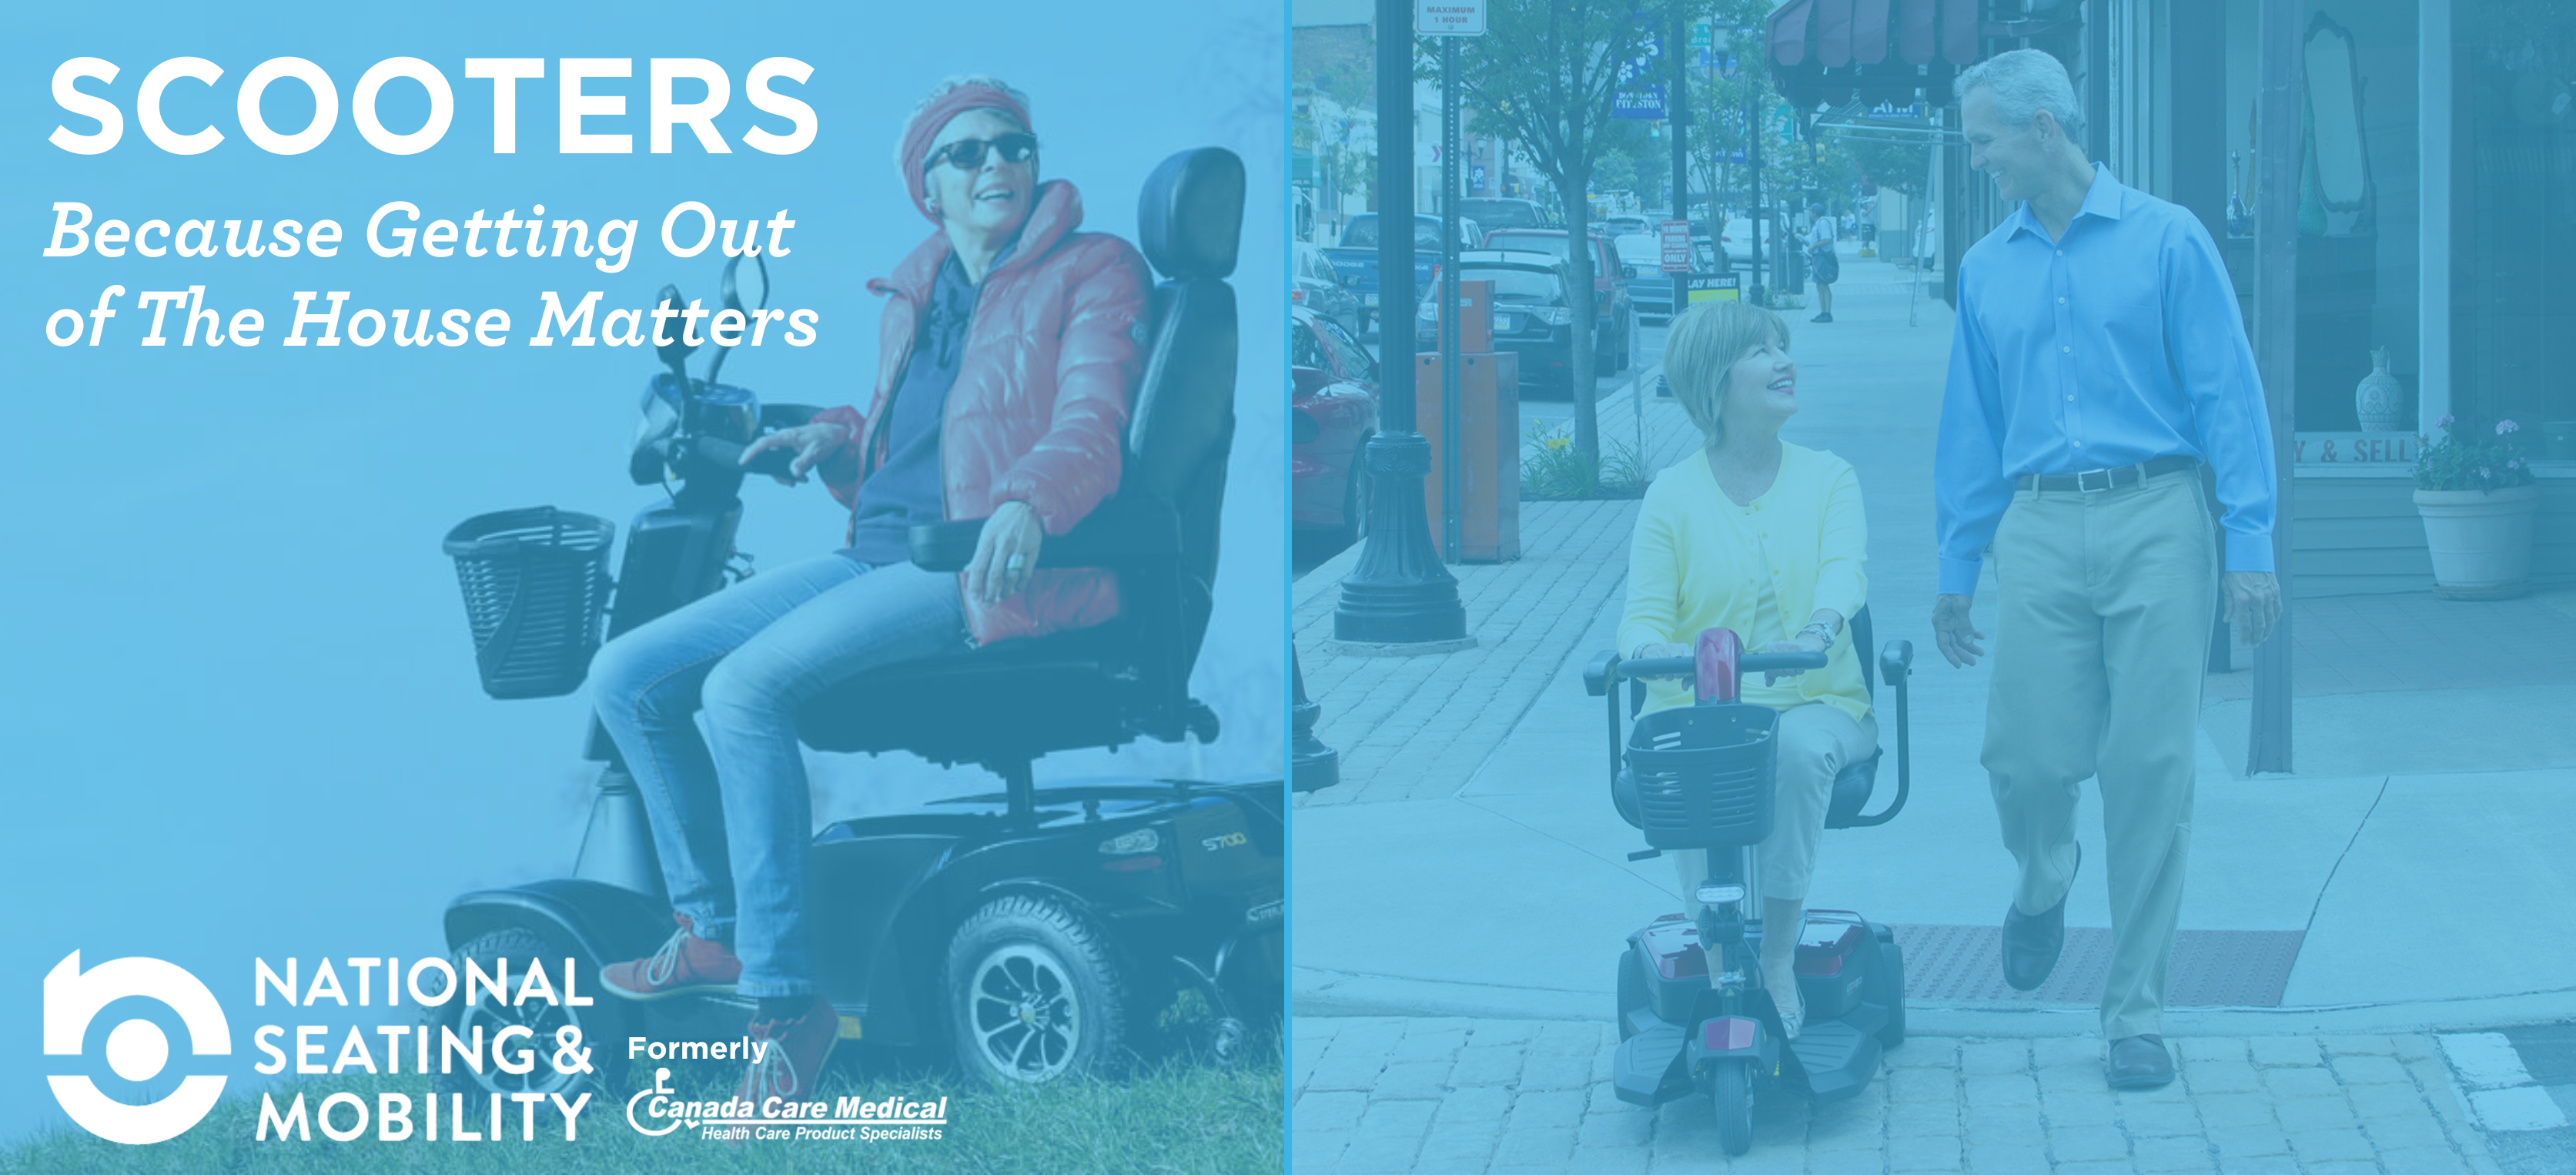 Two images of people using scooters to get around in the outdoors.